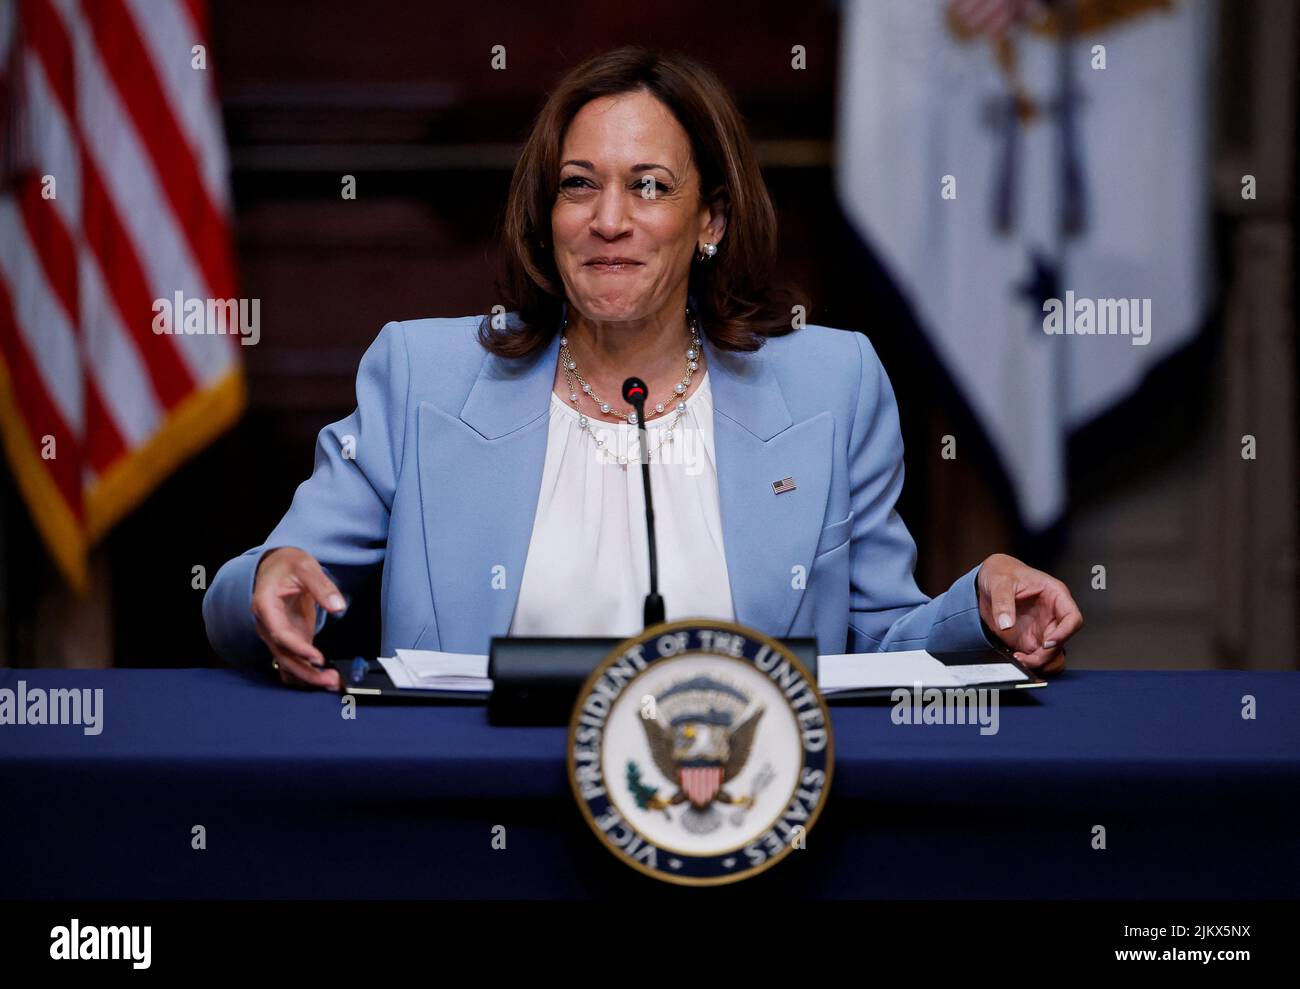 U.S. Vice President Kamala Harris reacts at a virtual event on securing access to reproductive and other health care services at the first meeting of the interagency Task Force on Reproductive Healthcare Access in the Indian Treaty Room in the Eisenhower Executive Office Building, in Washington, U.S., August 3, 2022. REUTERS/Evelyn Hockstein Stock Photo